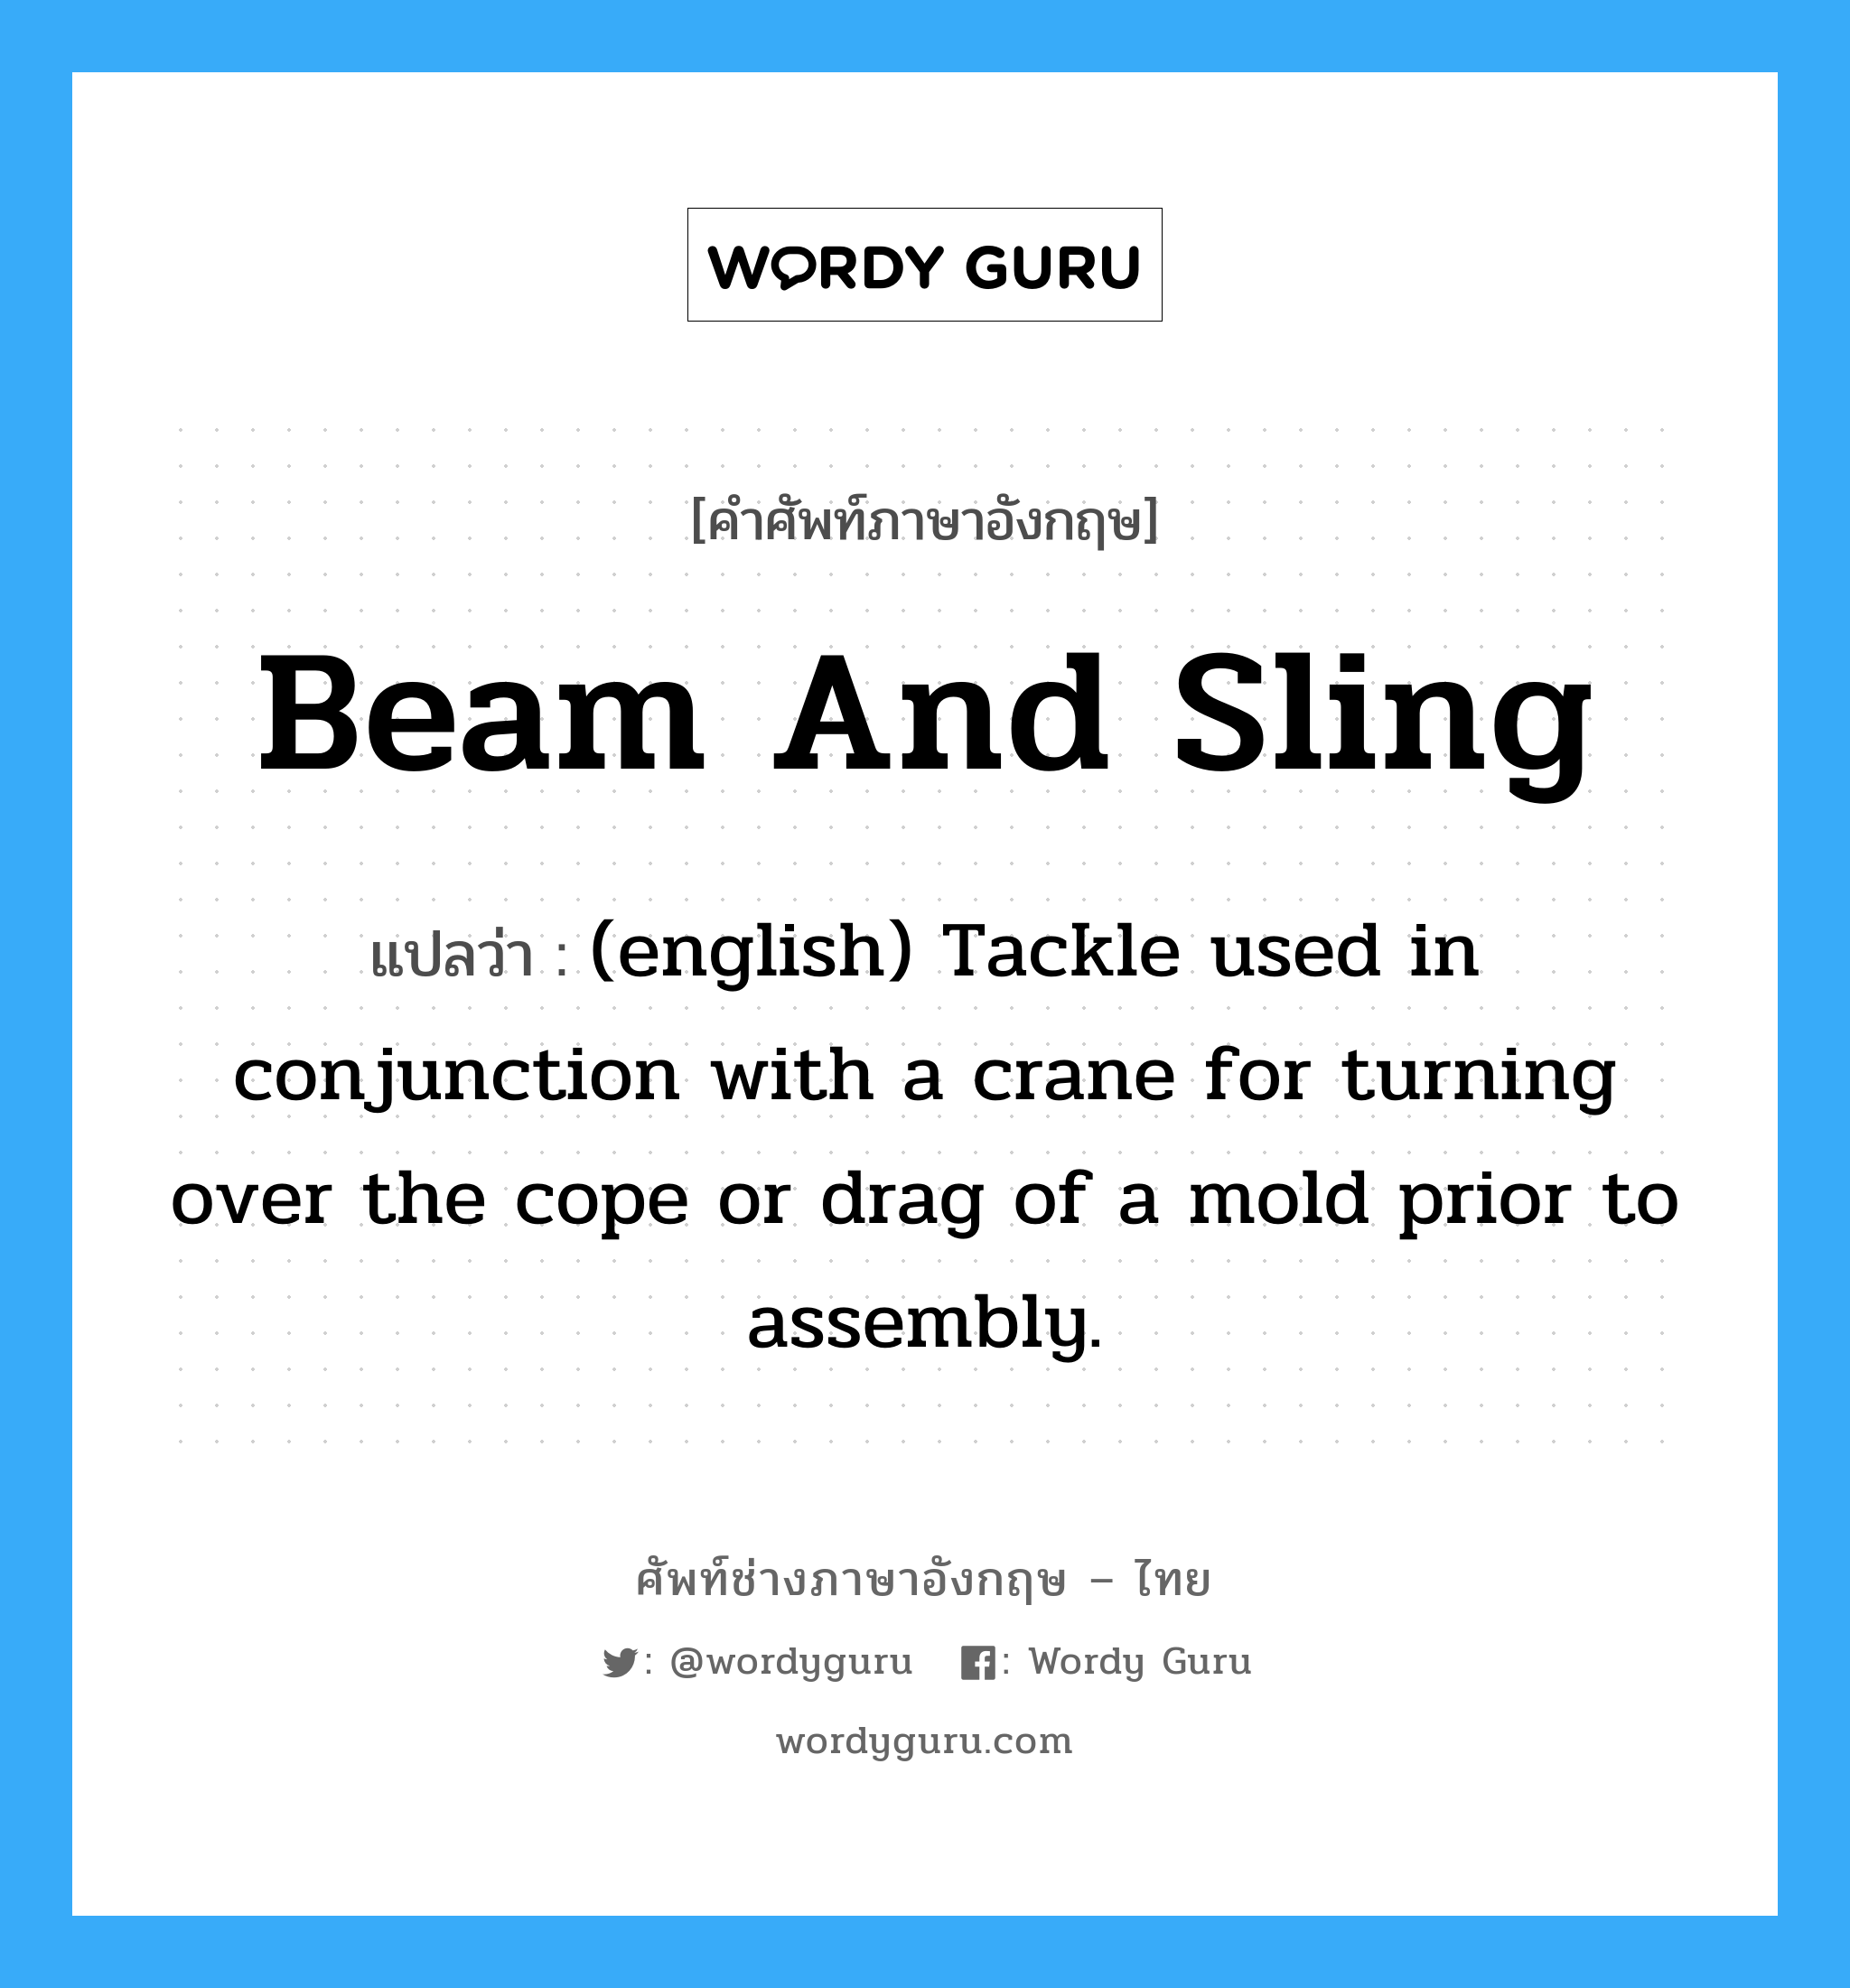 Beam and Sling แปลว่า?, คำศัพท์ช่างภาษาอังกฤษ - ไทย Beam and Sling คำศัพท์ภาษาอังกฤษ Beam and Sling แปลว่า (english) Tackle used in conjunction with a crane for turning over the cope or drag of a mold prior to assembly.